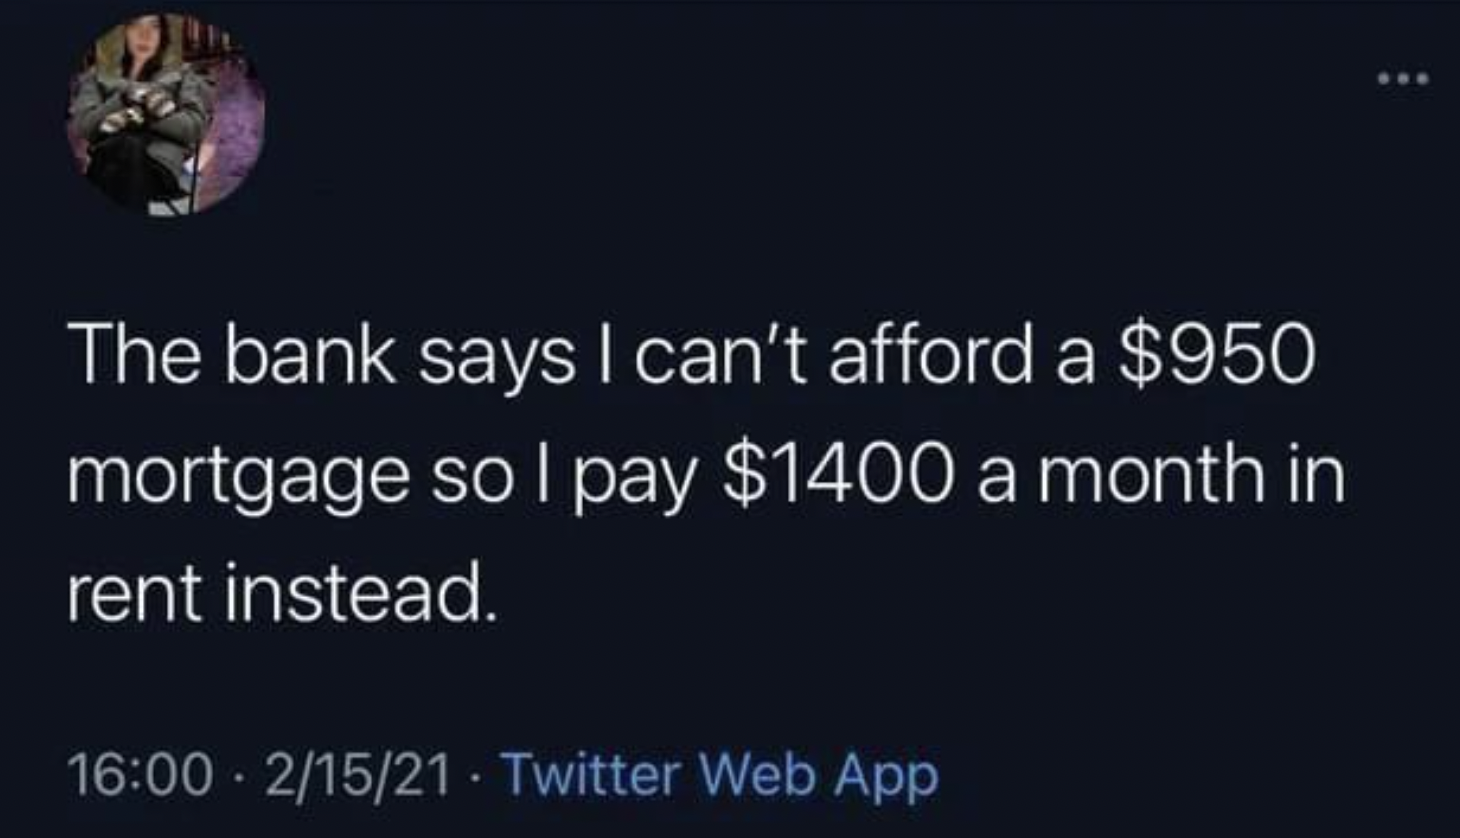 f around and find out bernie - The bank says I can't afford a $950 mortgage so I pay $1400 a month in rent instead.